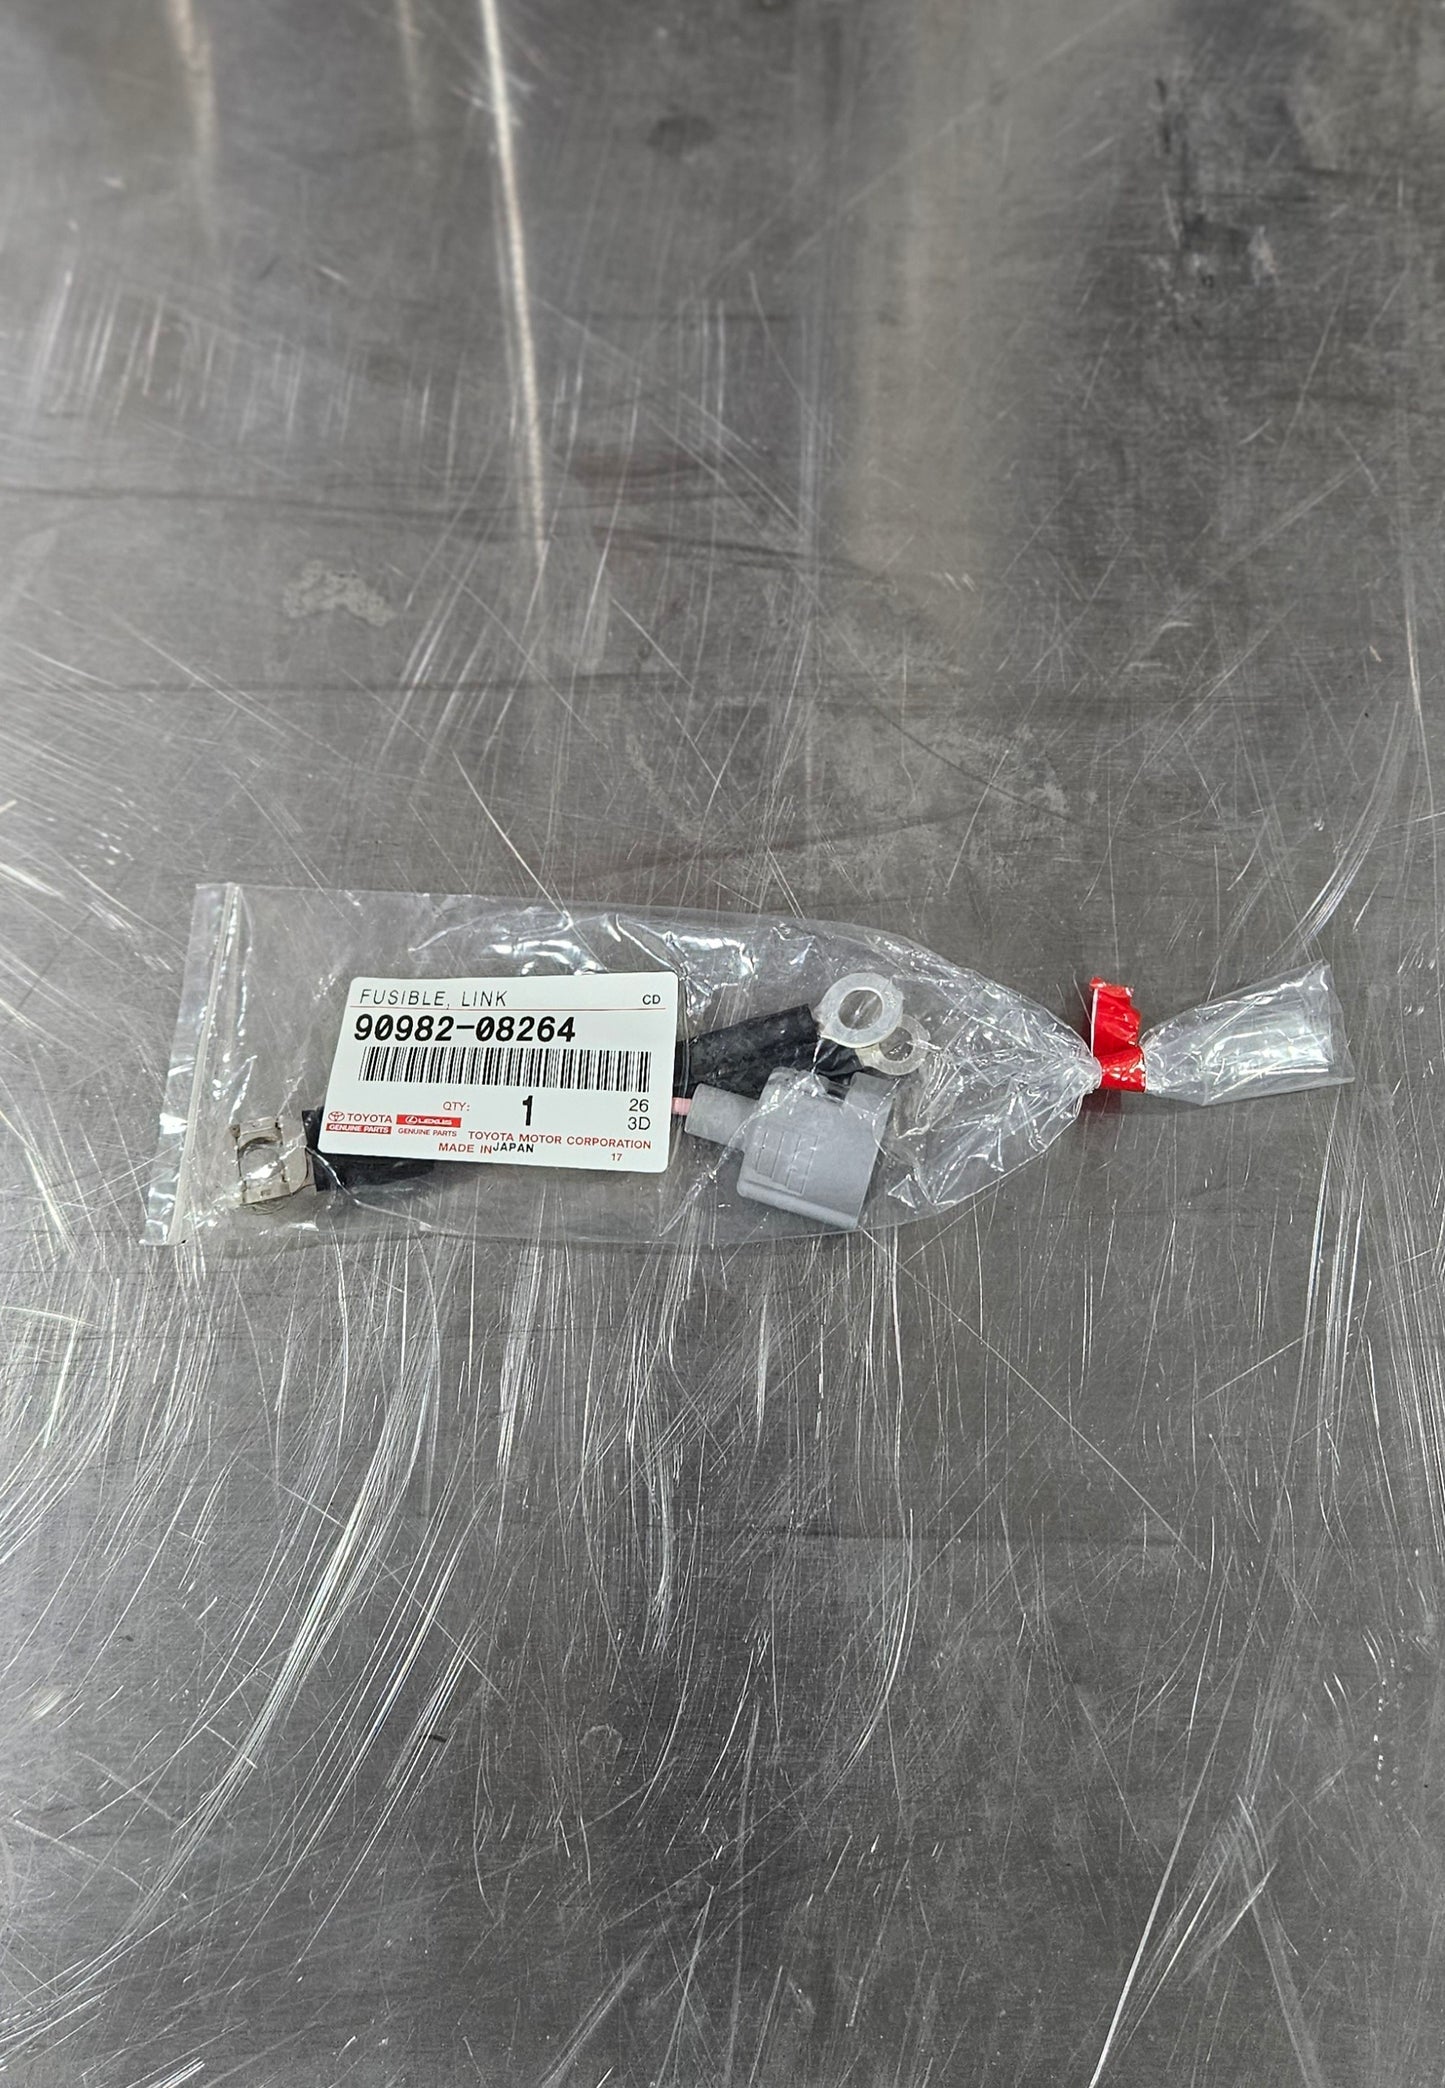 80 Series Fusible Link